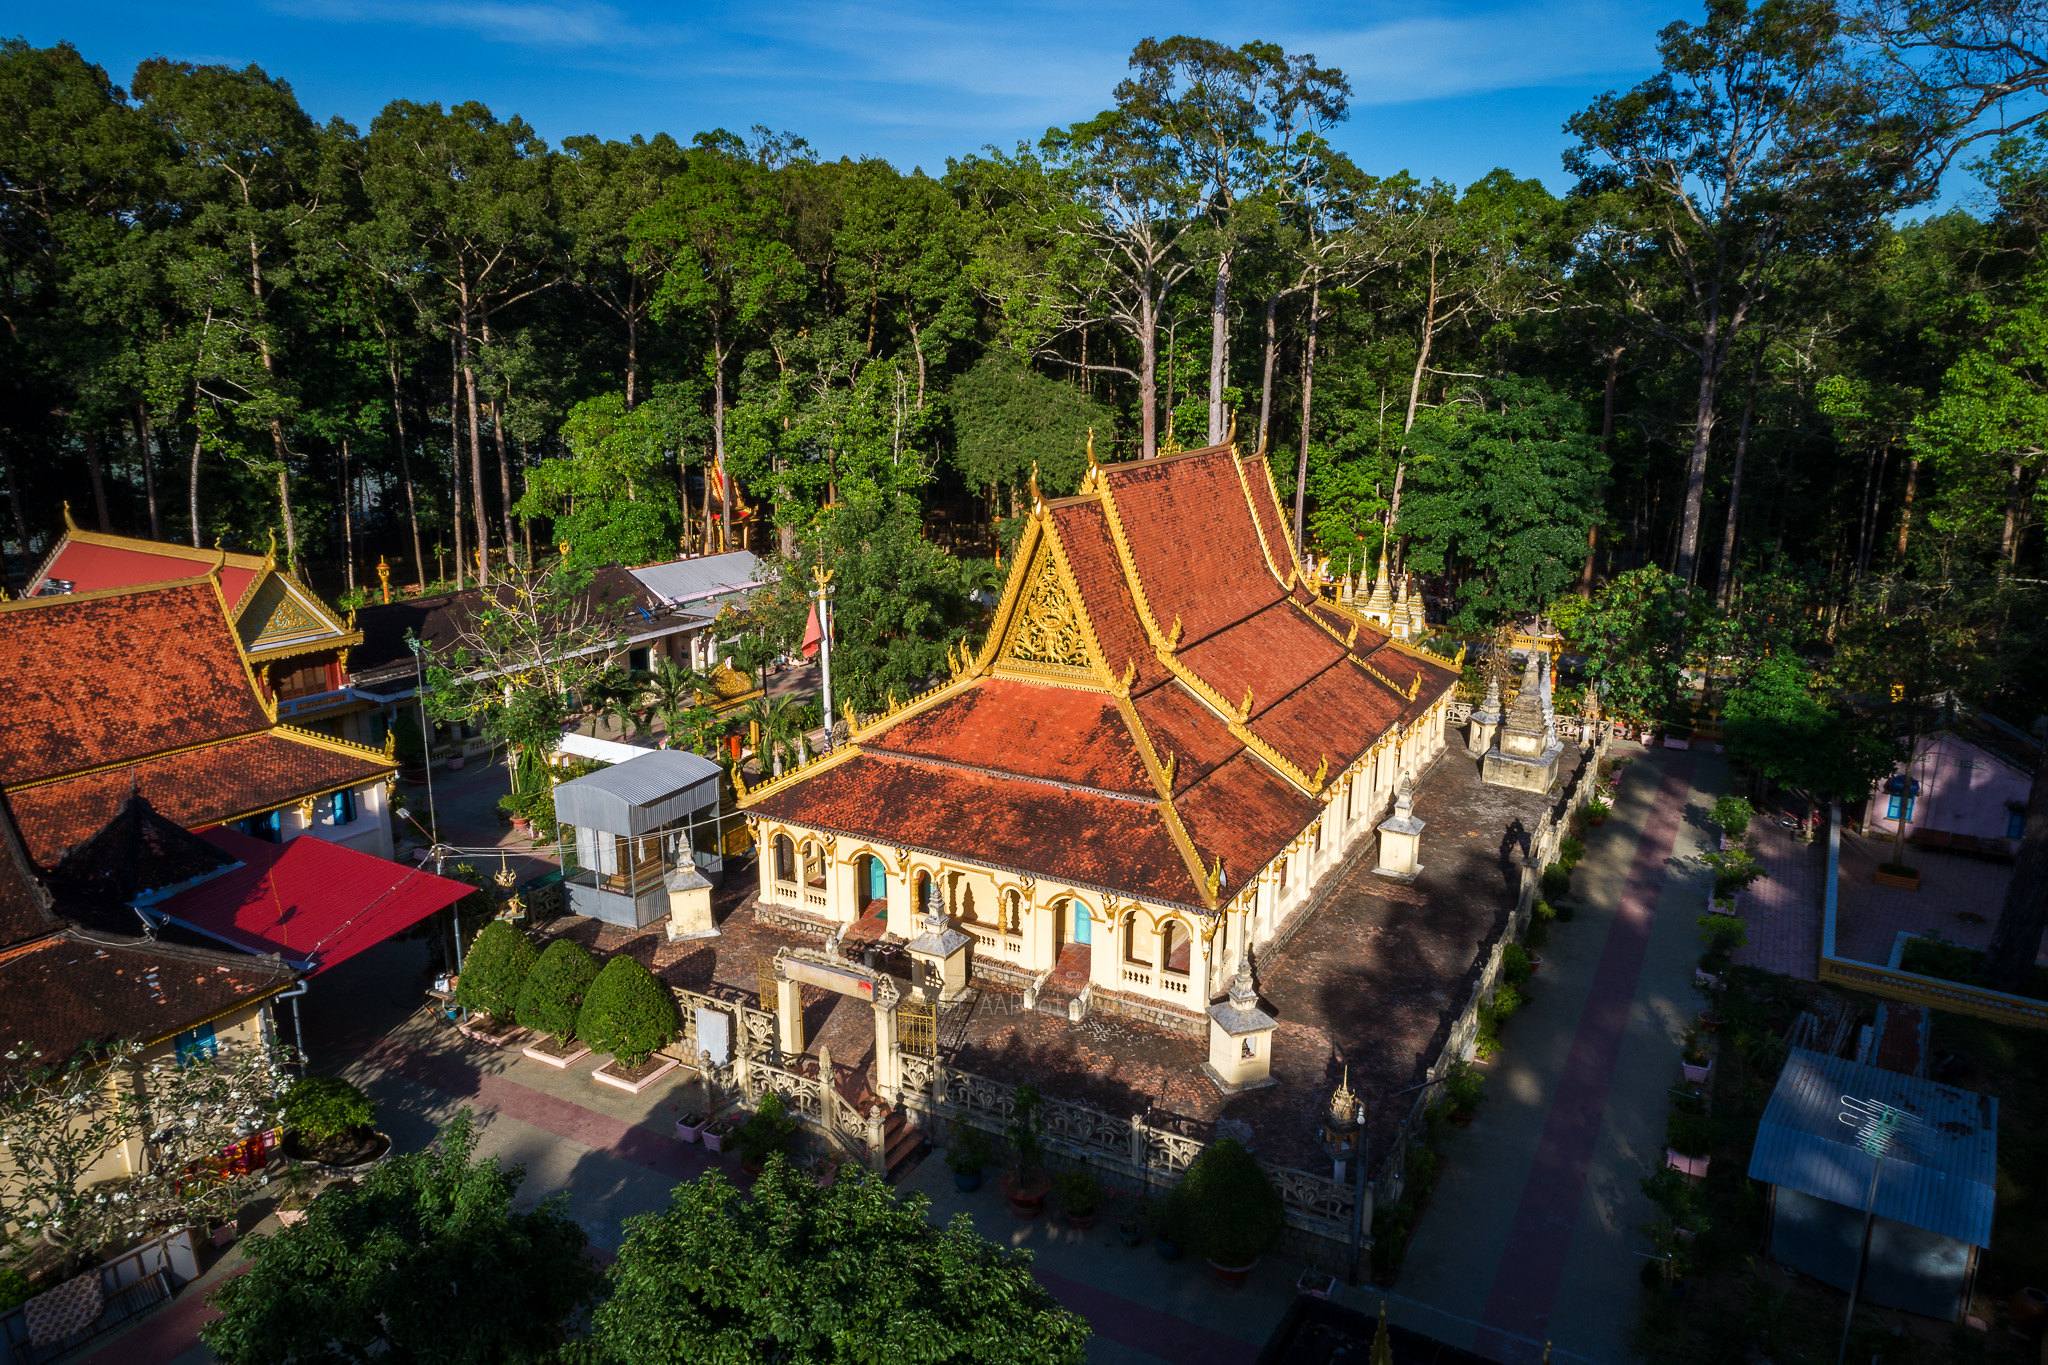 Ang Pagoda is one of the oldest pagodas in Tra Vinh with rich Khmer culture. Mekong Delta 